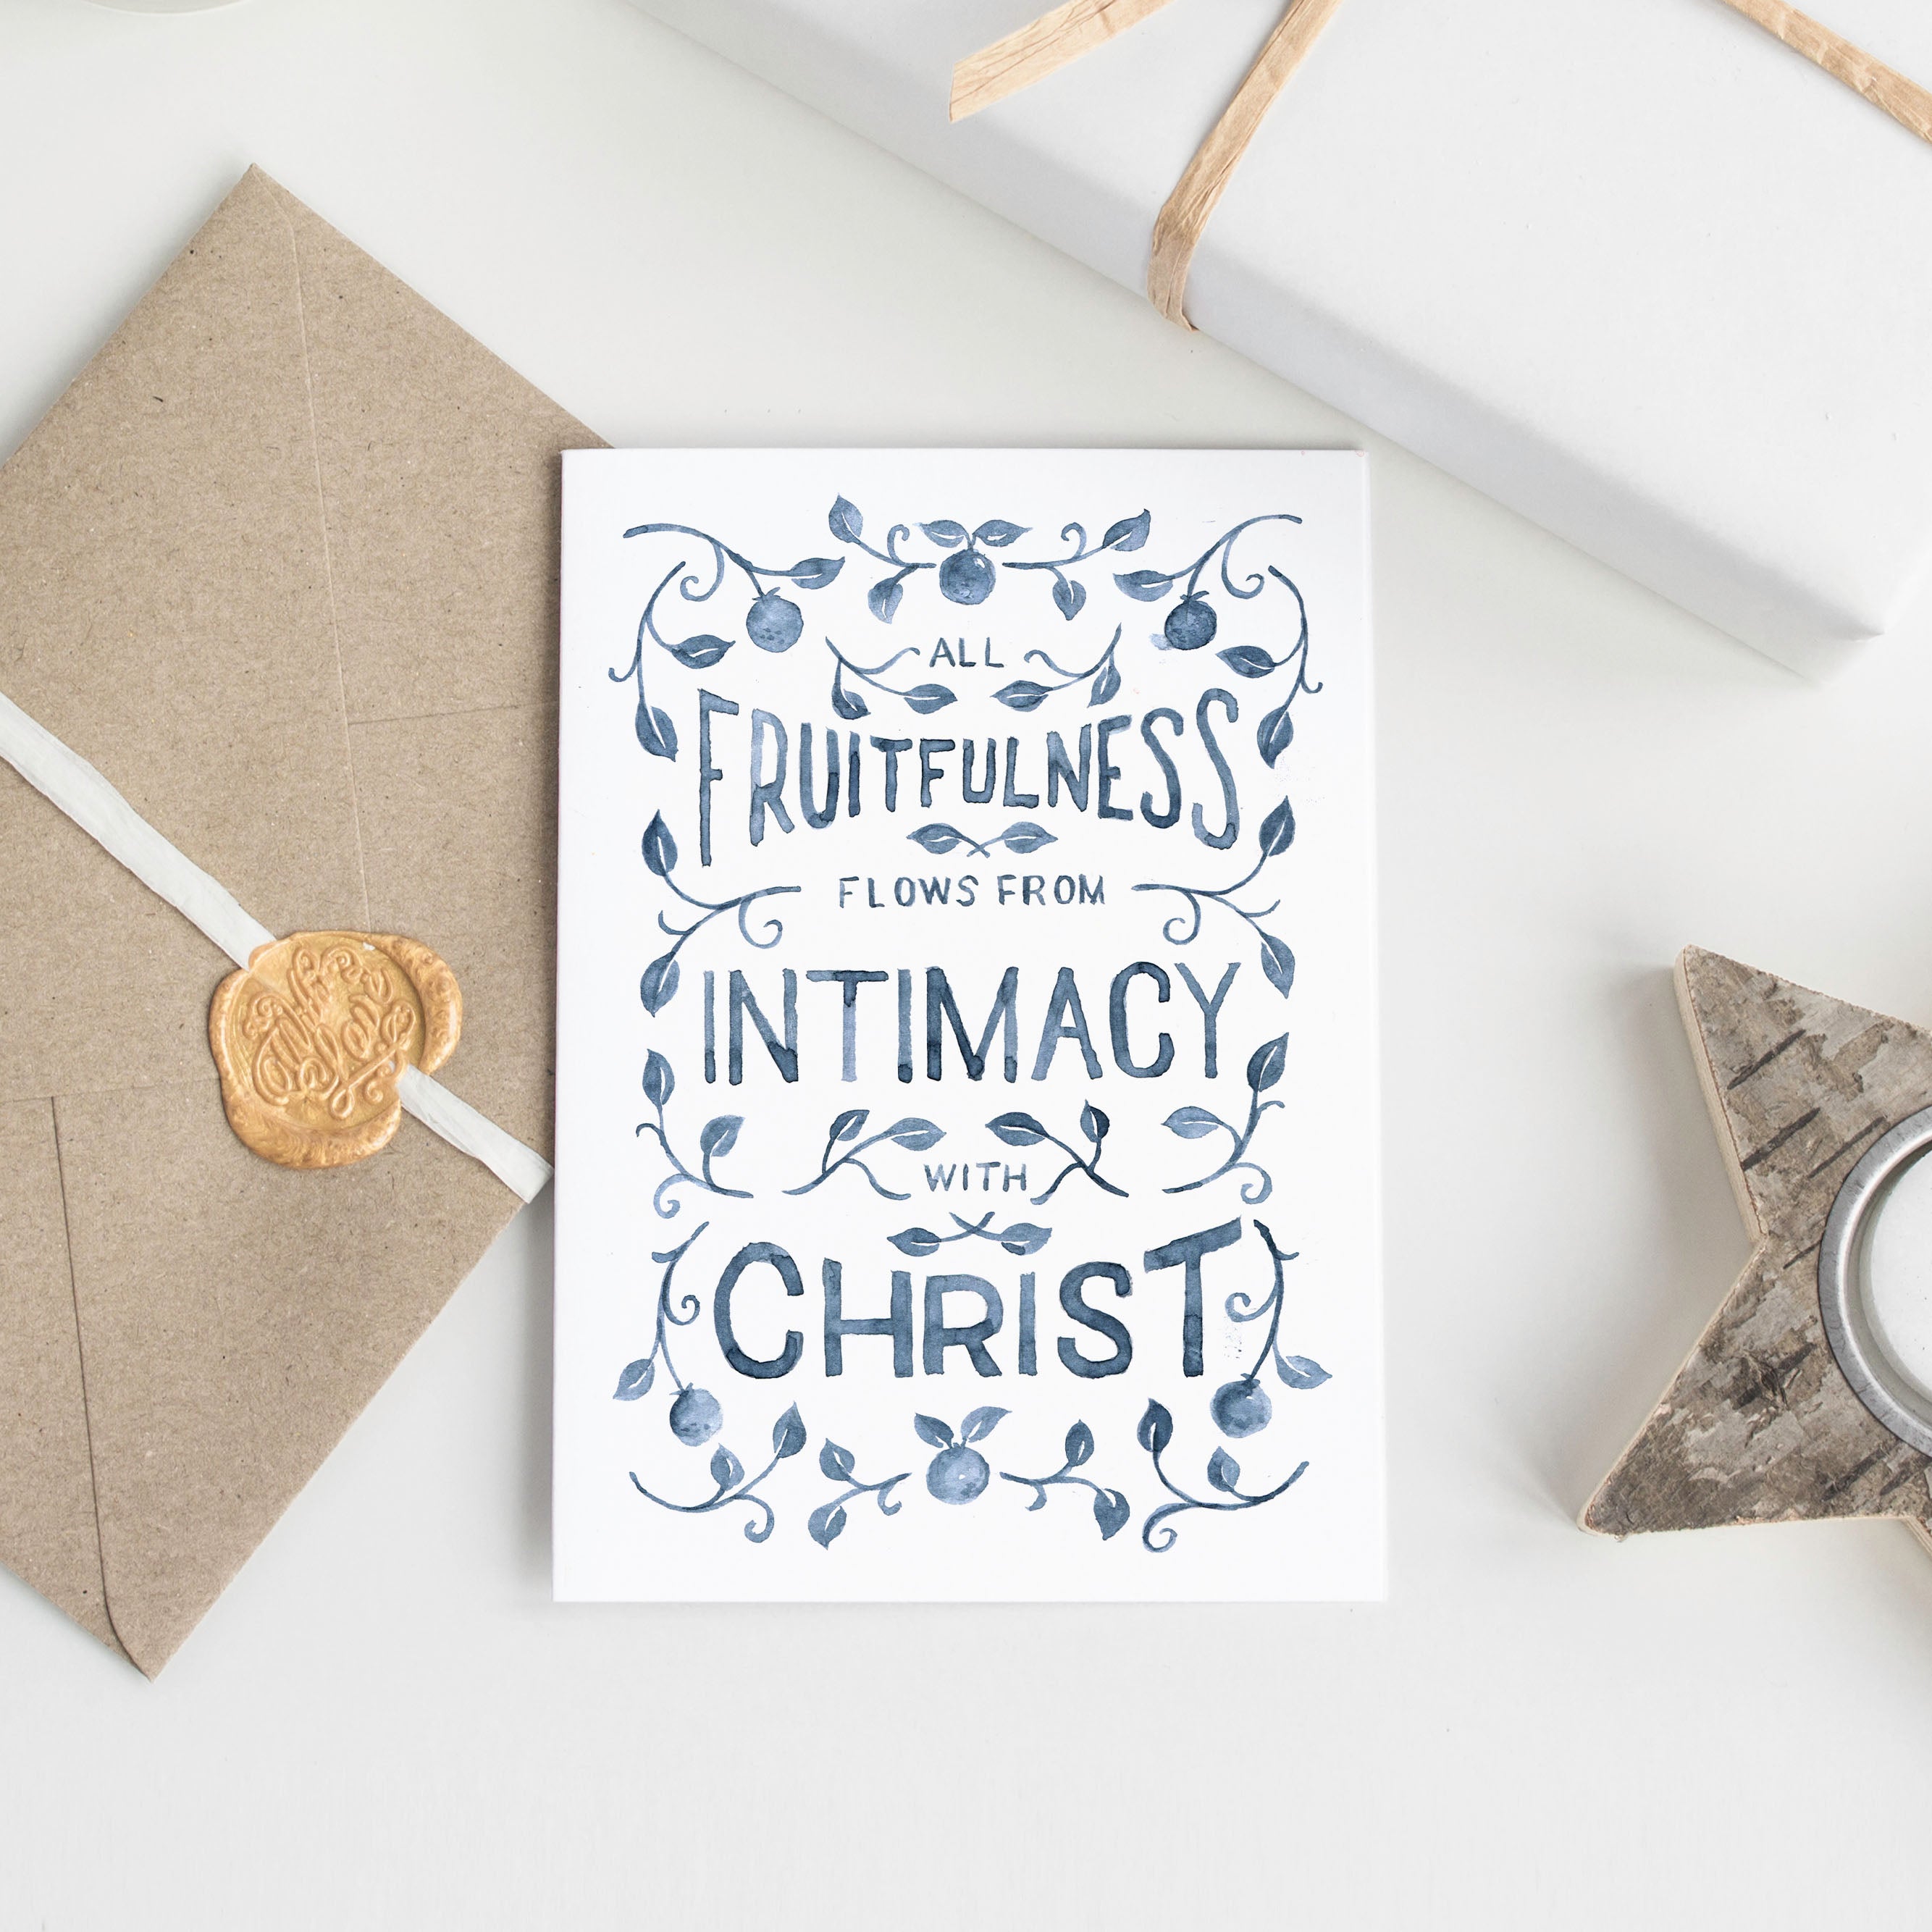 All Fruitfulness Flows from Intimacy with Christ - Free Christian Art Printable